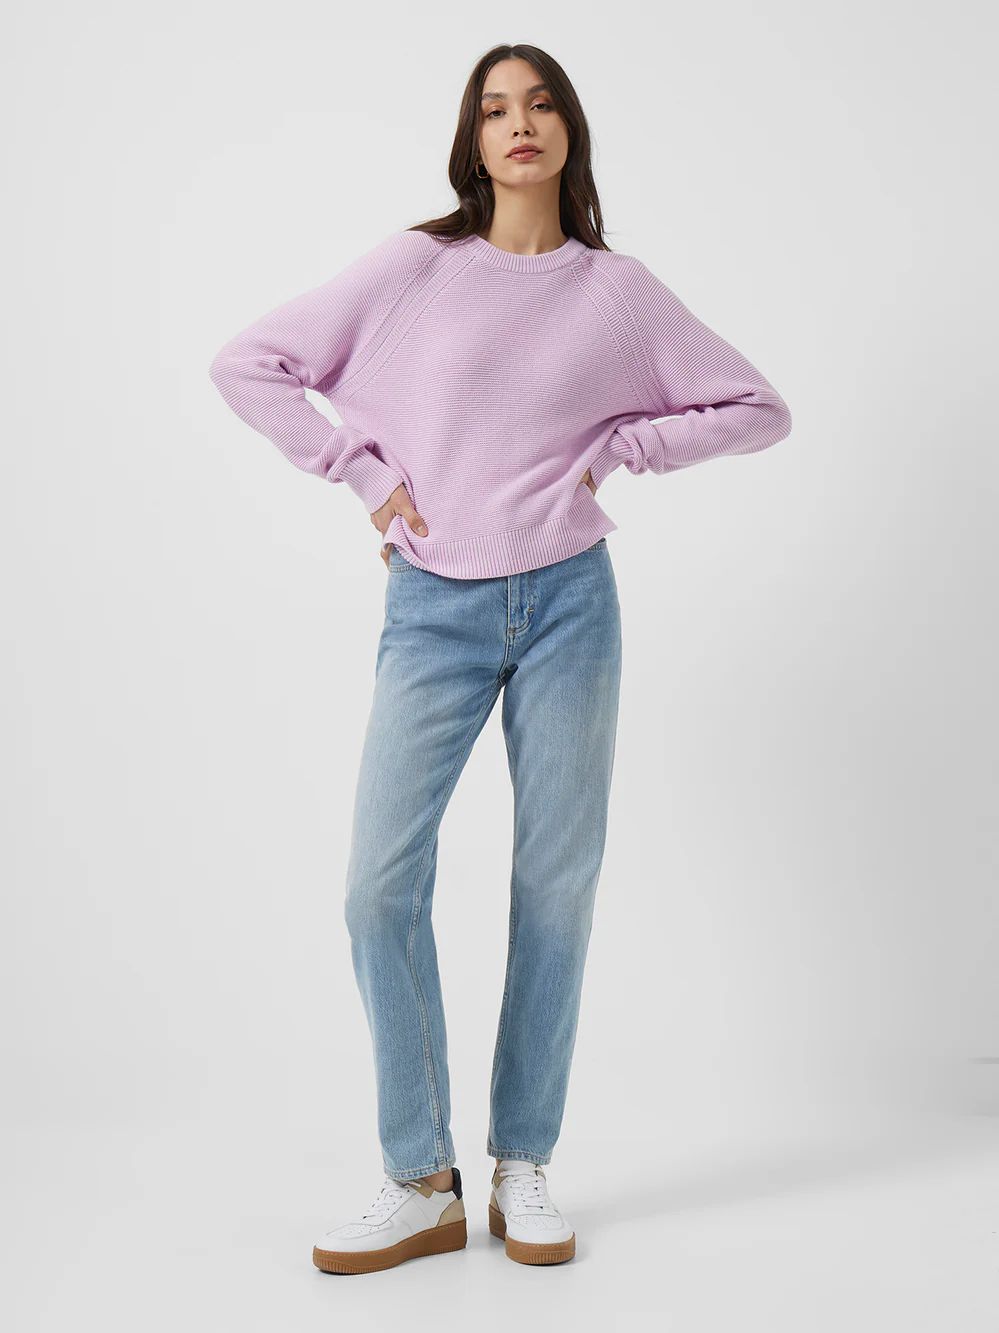 Lilly Mozart Sweater | French Connection (US)